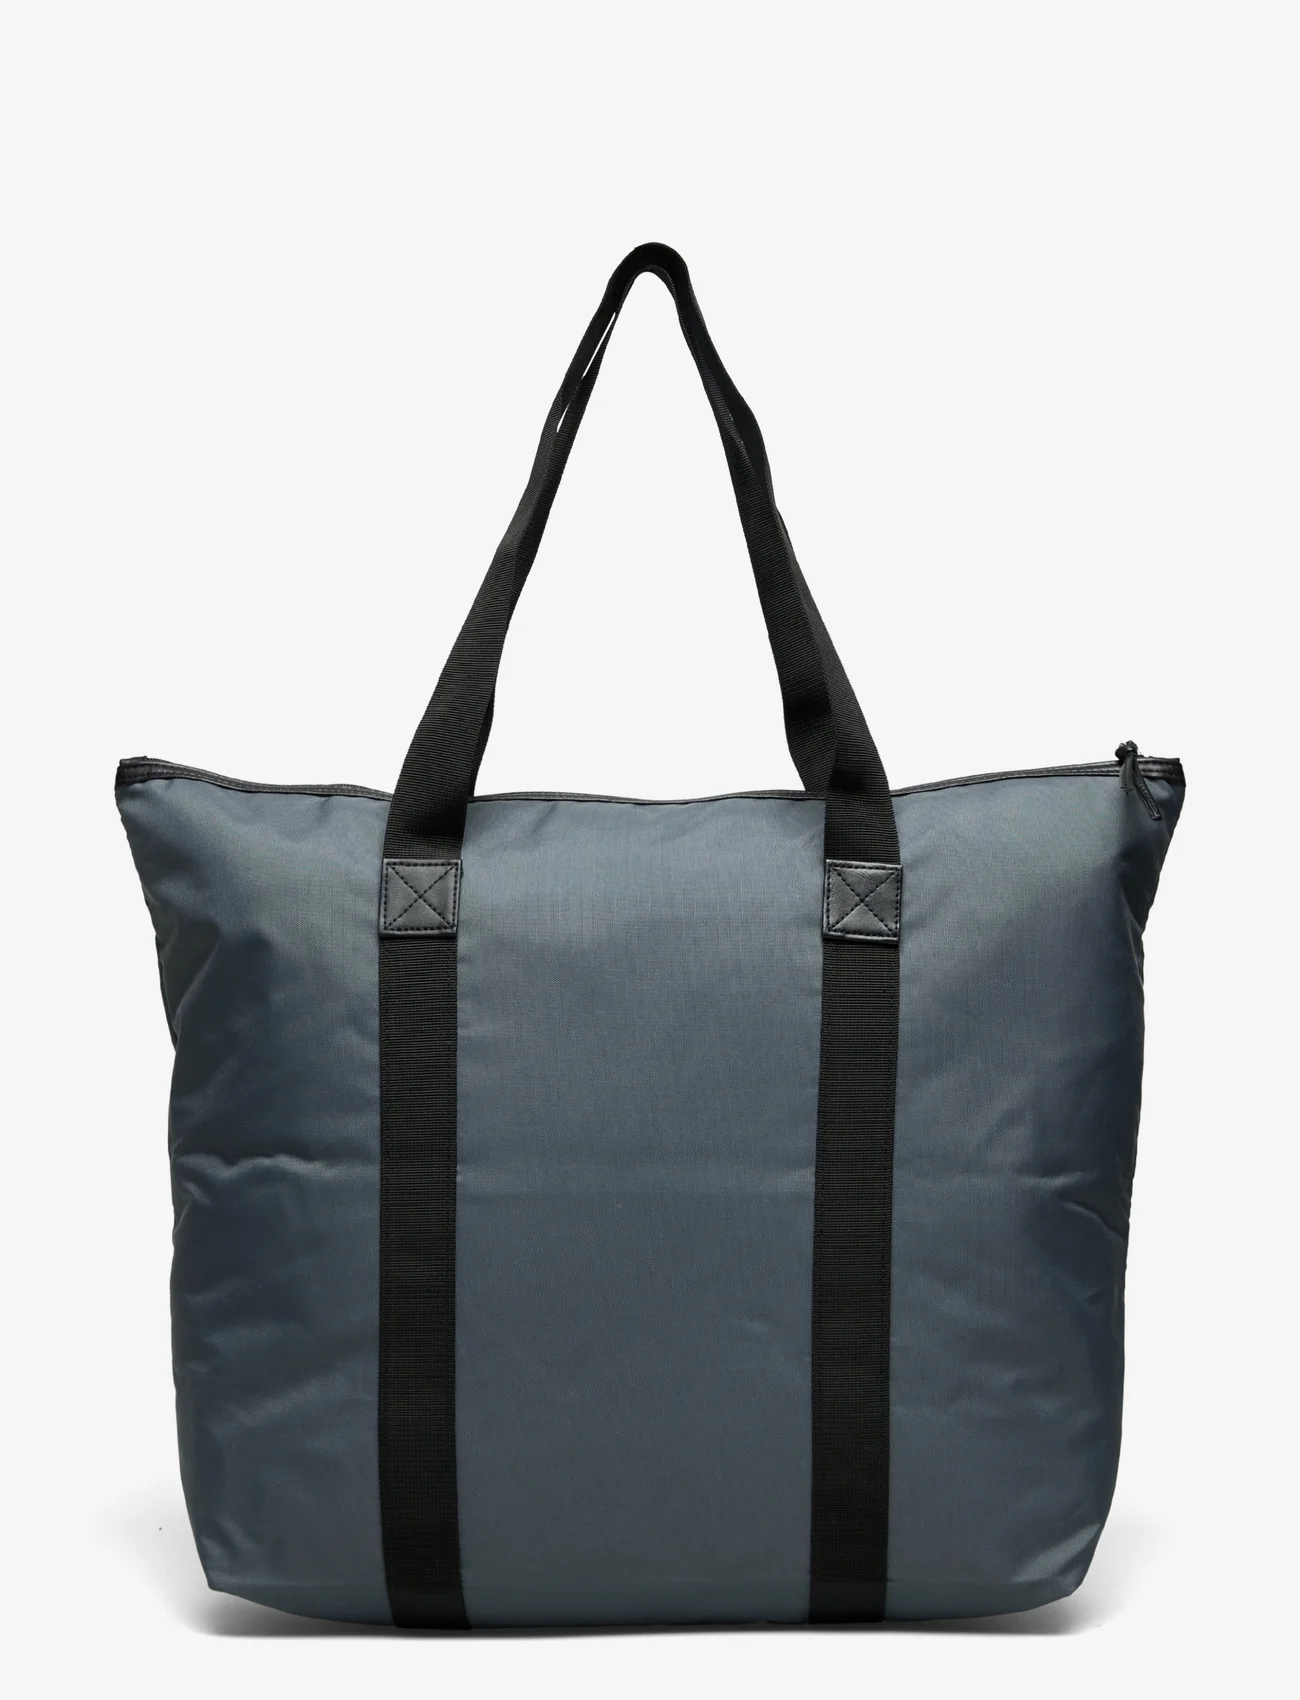 DAY ET - Day Gweneth RE-S Bag - tote bags - dark slate - 1